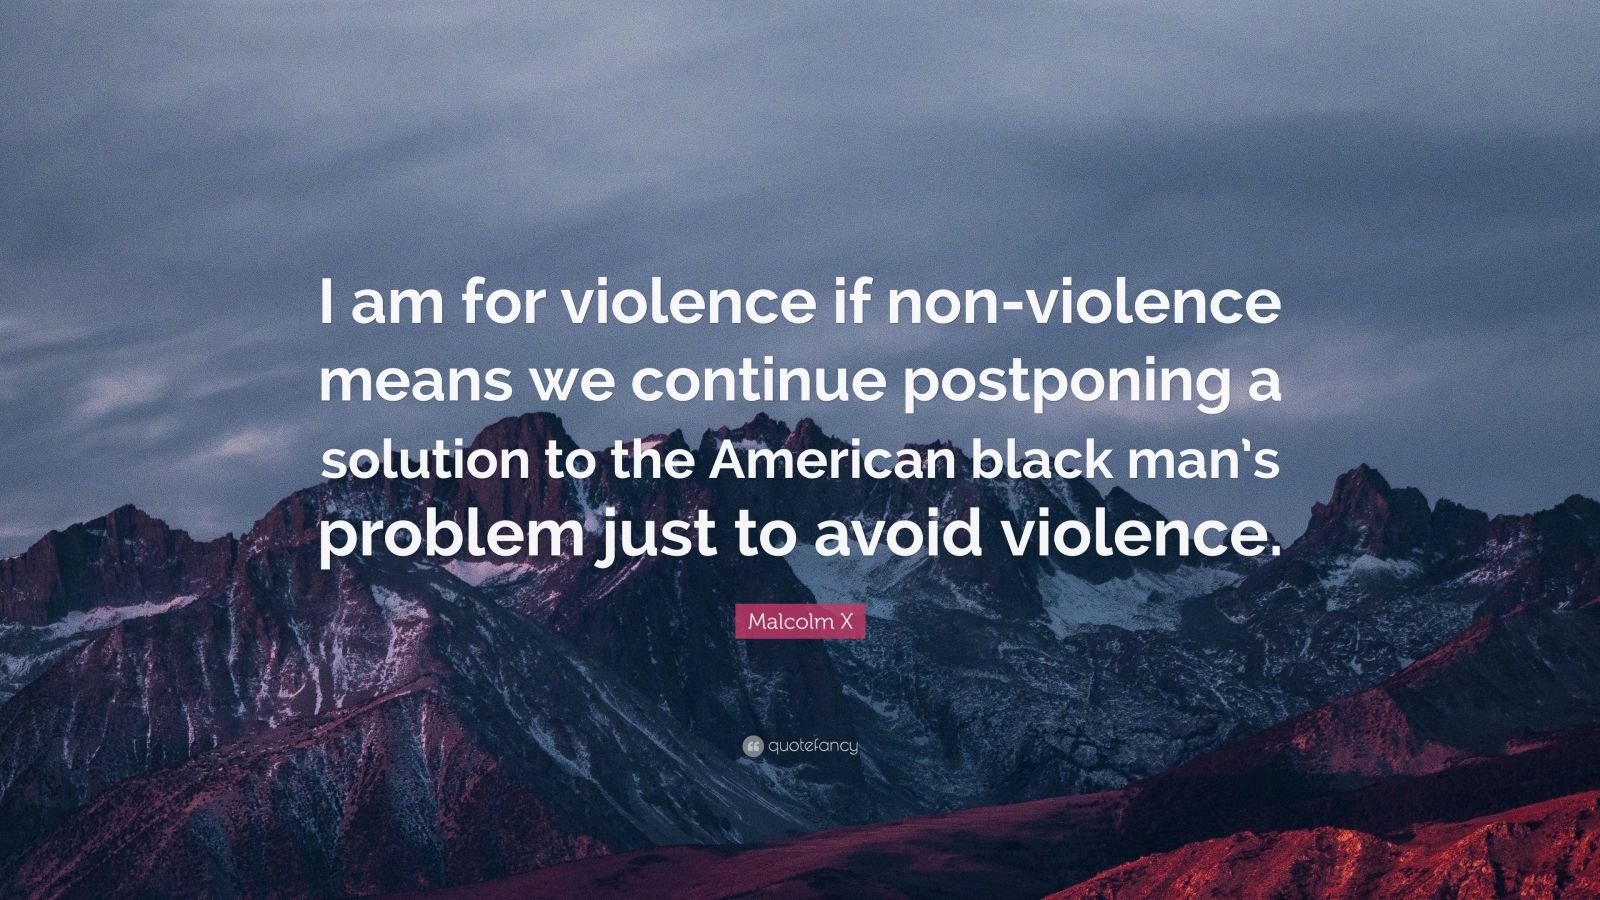 Malcolm X Quote: "I am for violence if non-violence means we continue postponing a solution to ...